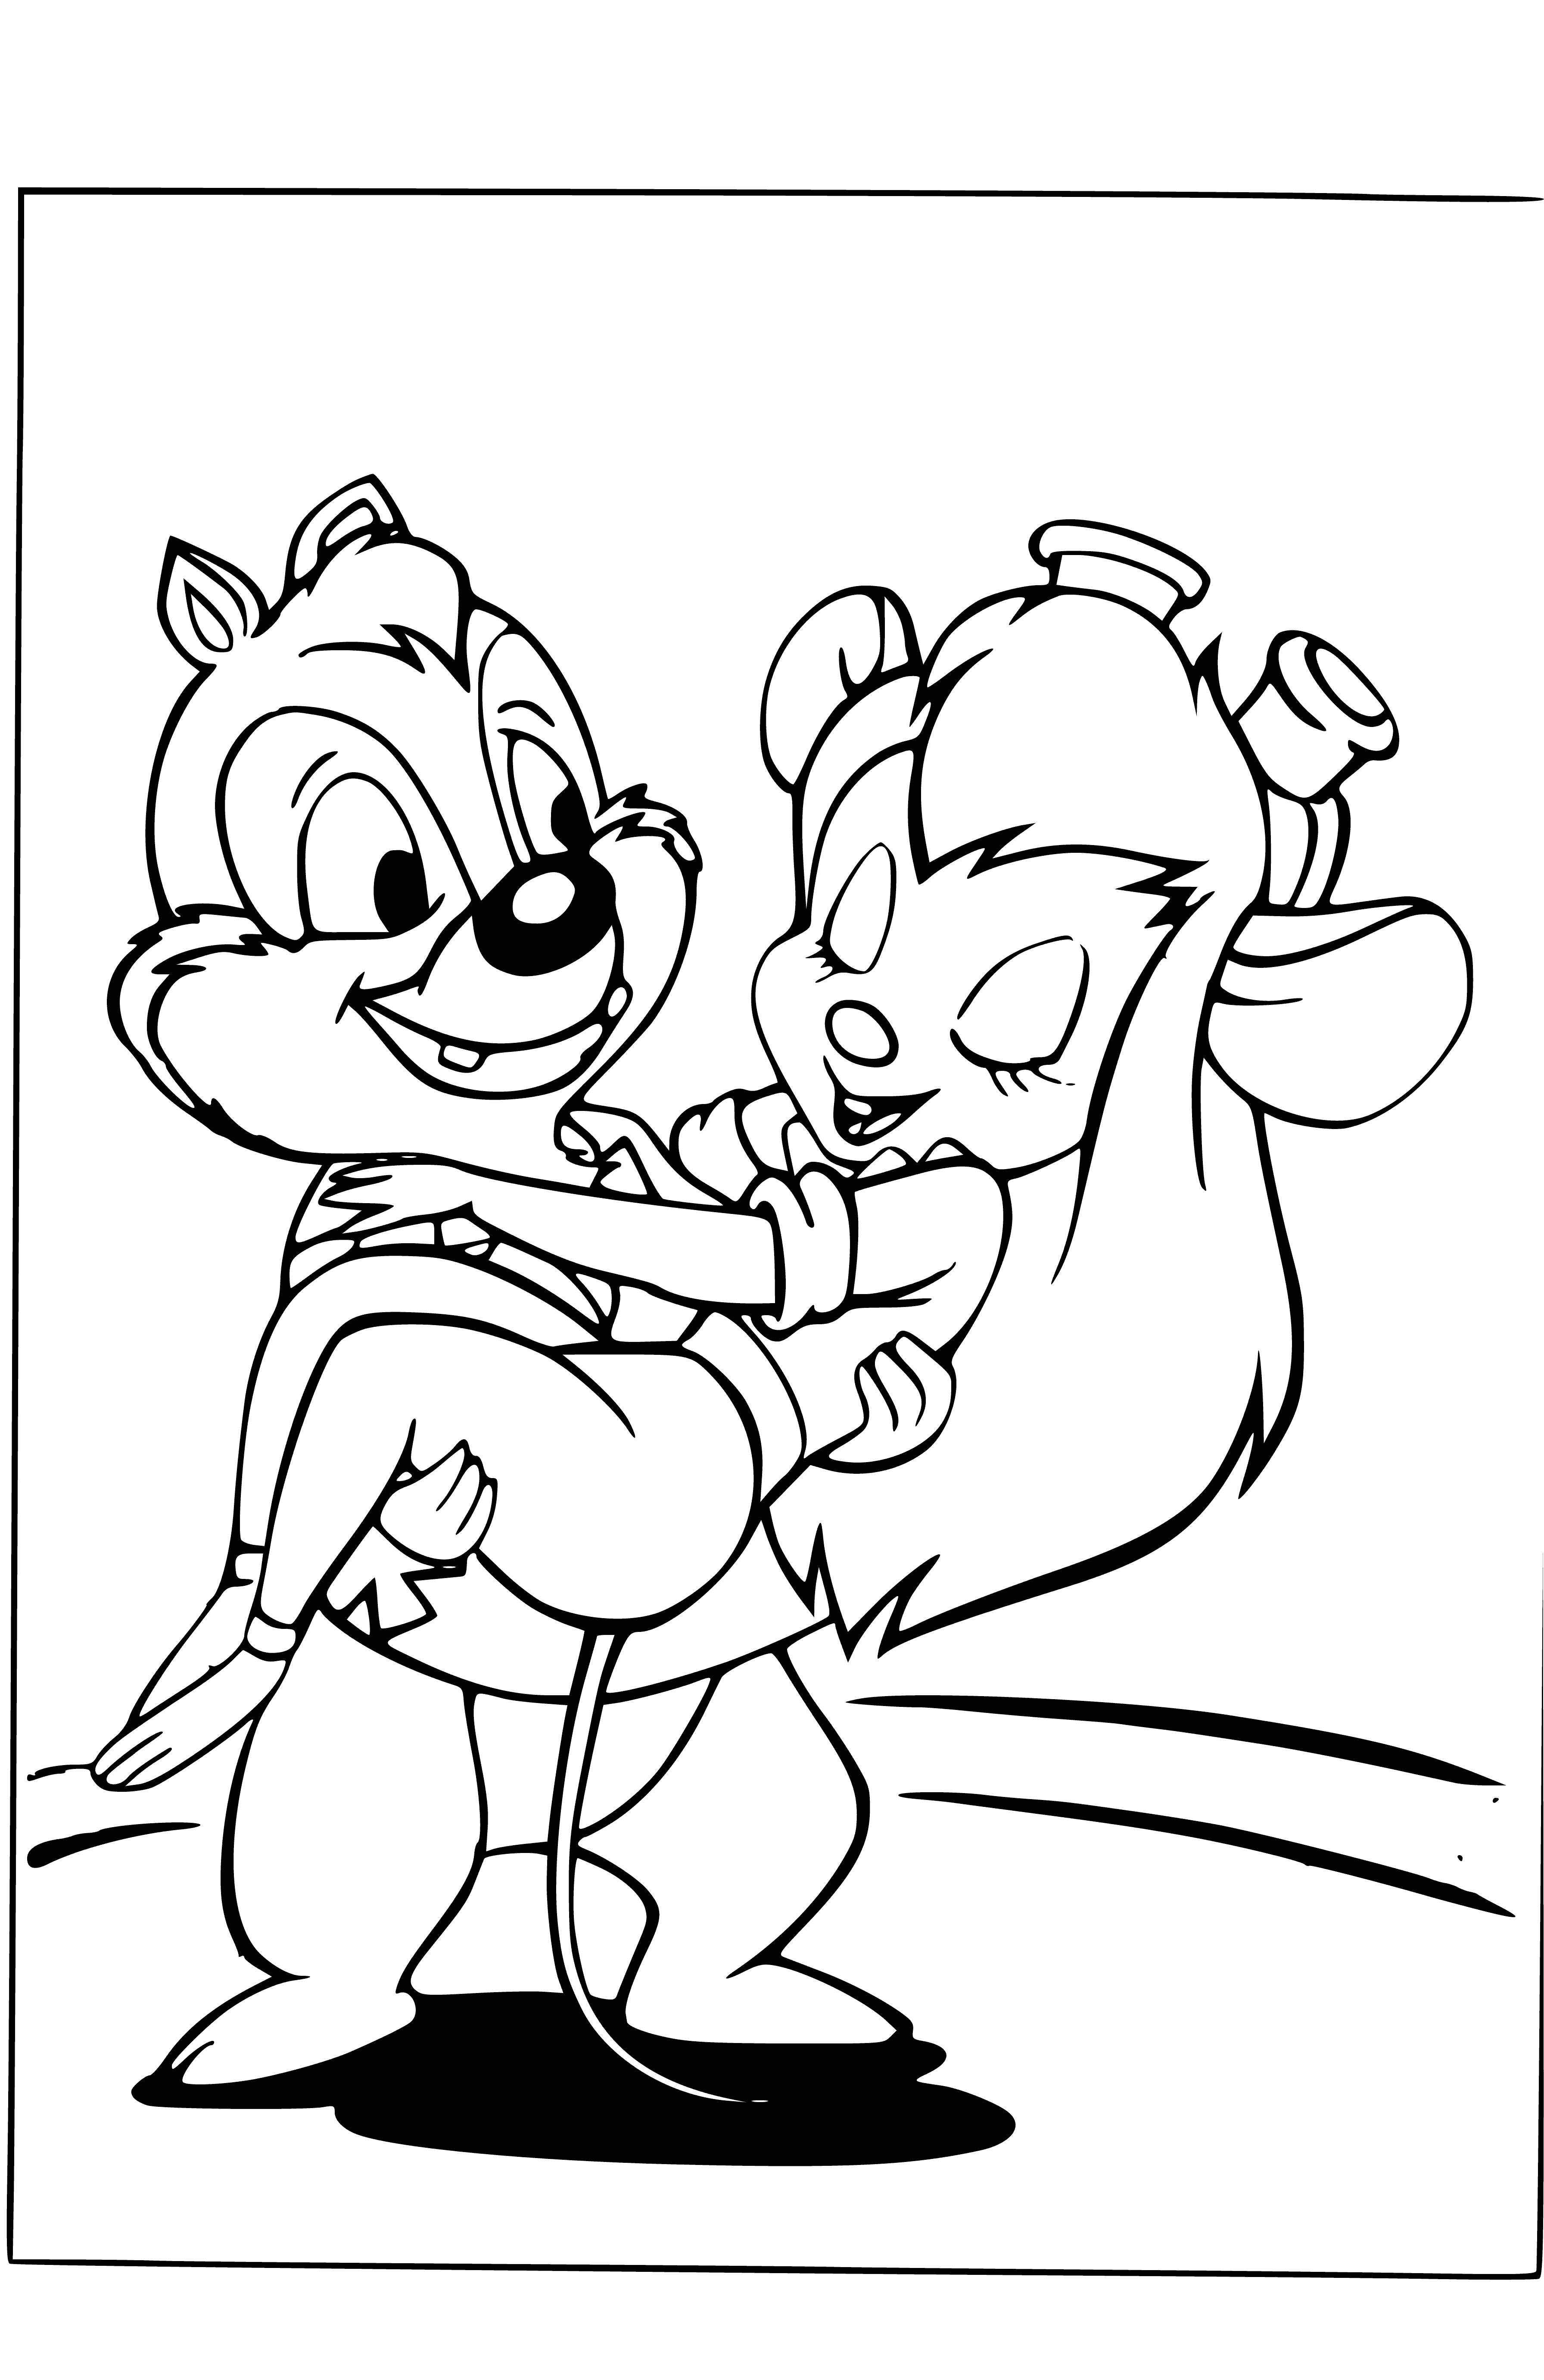 Nut and Dale coloring page